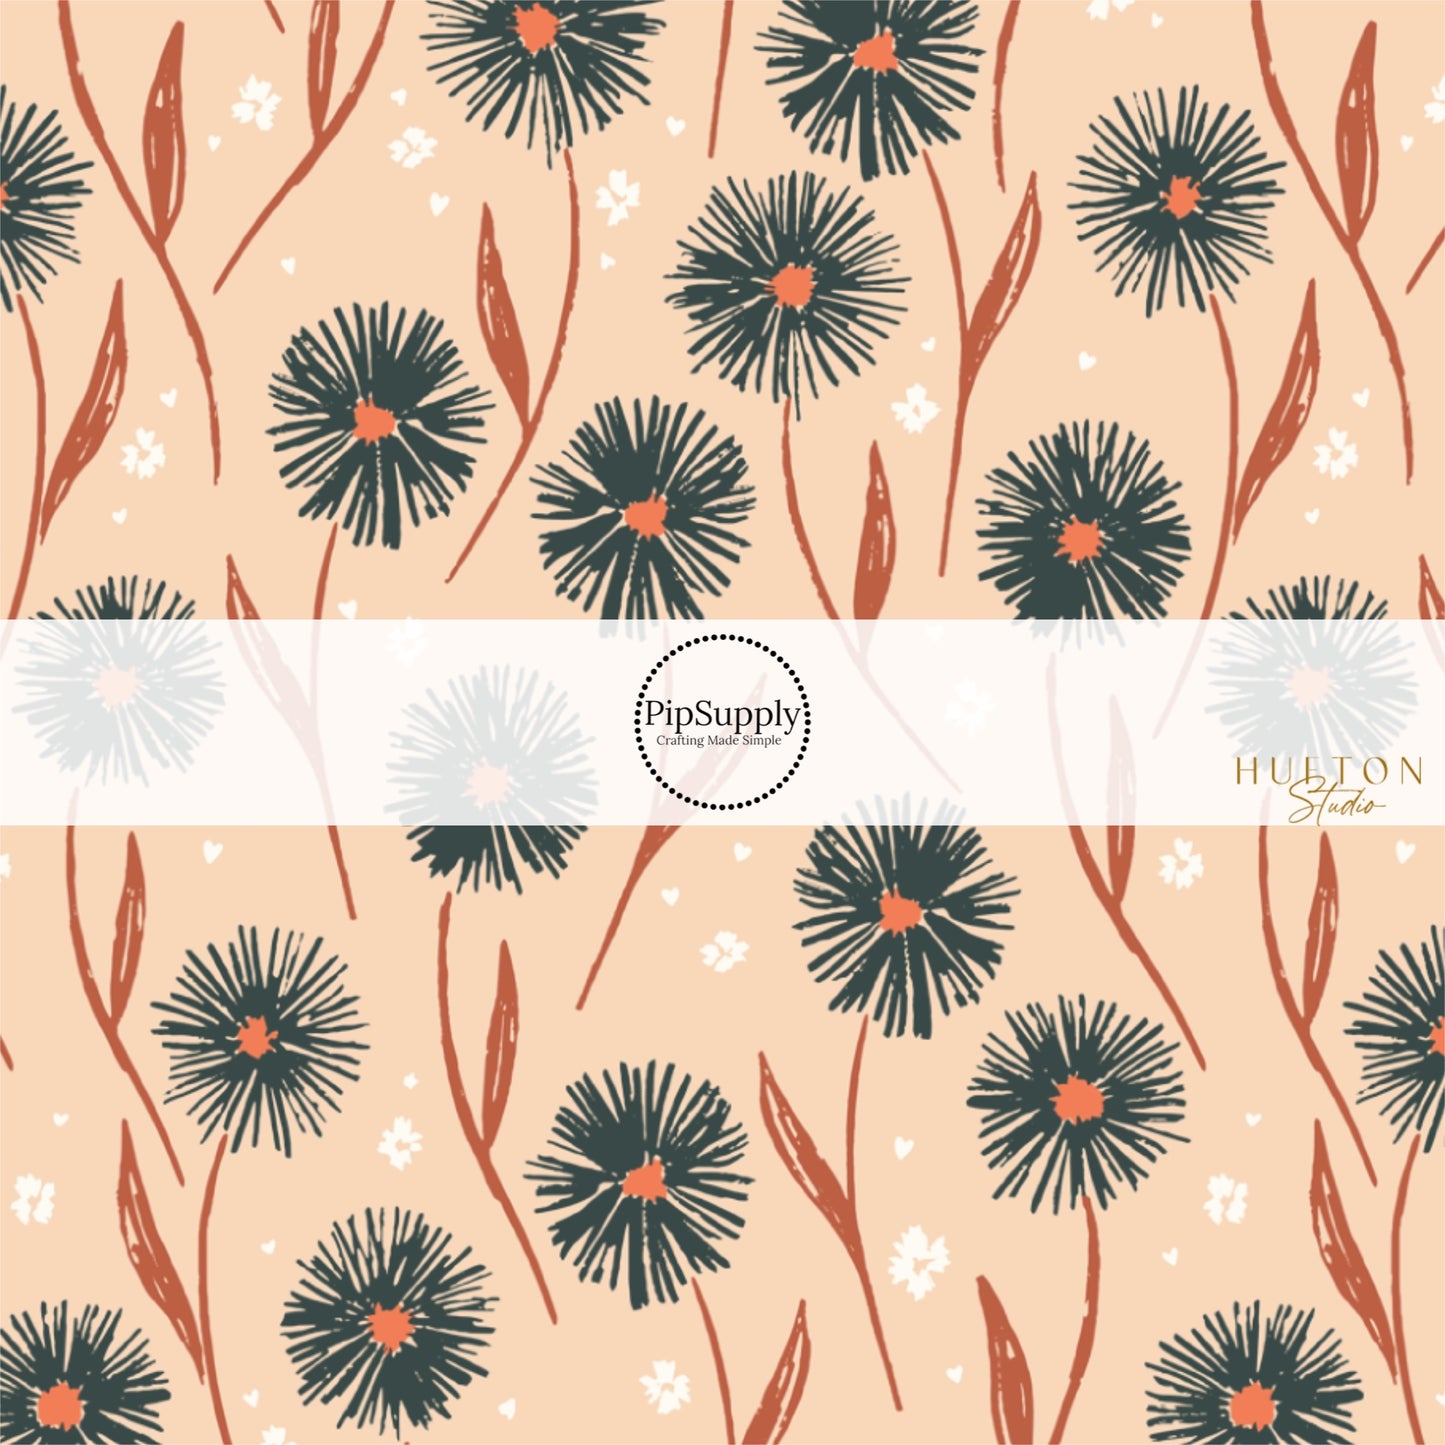 These fall floral themed fabric by the yard features small white flowers with large dark green daisies with brown stems. This fun daisy themed fabric can be used for all your sewing and crafting needs! 